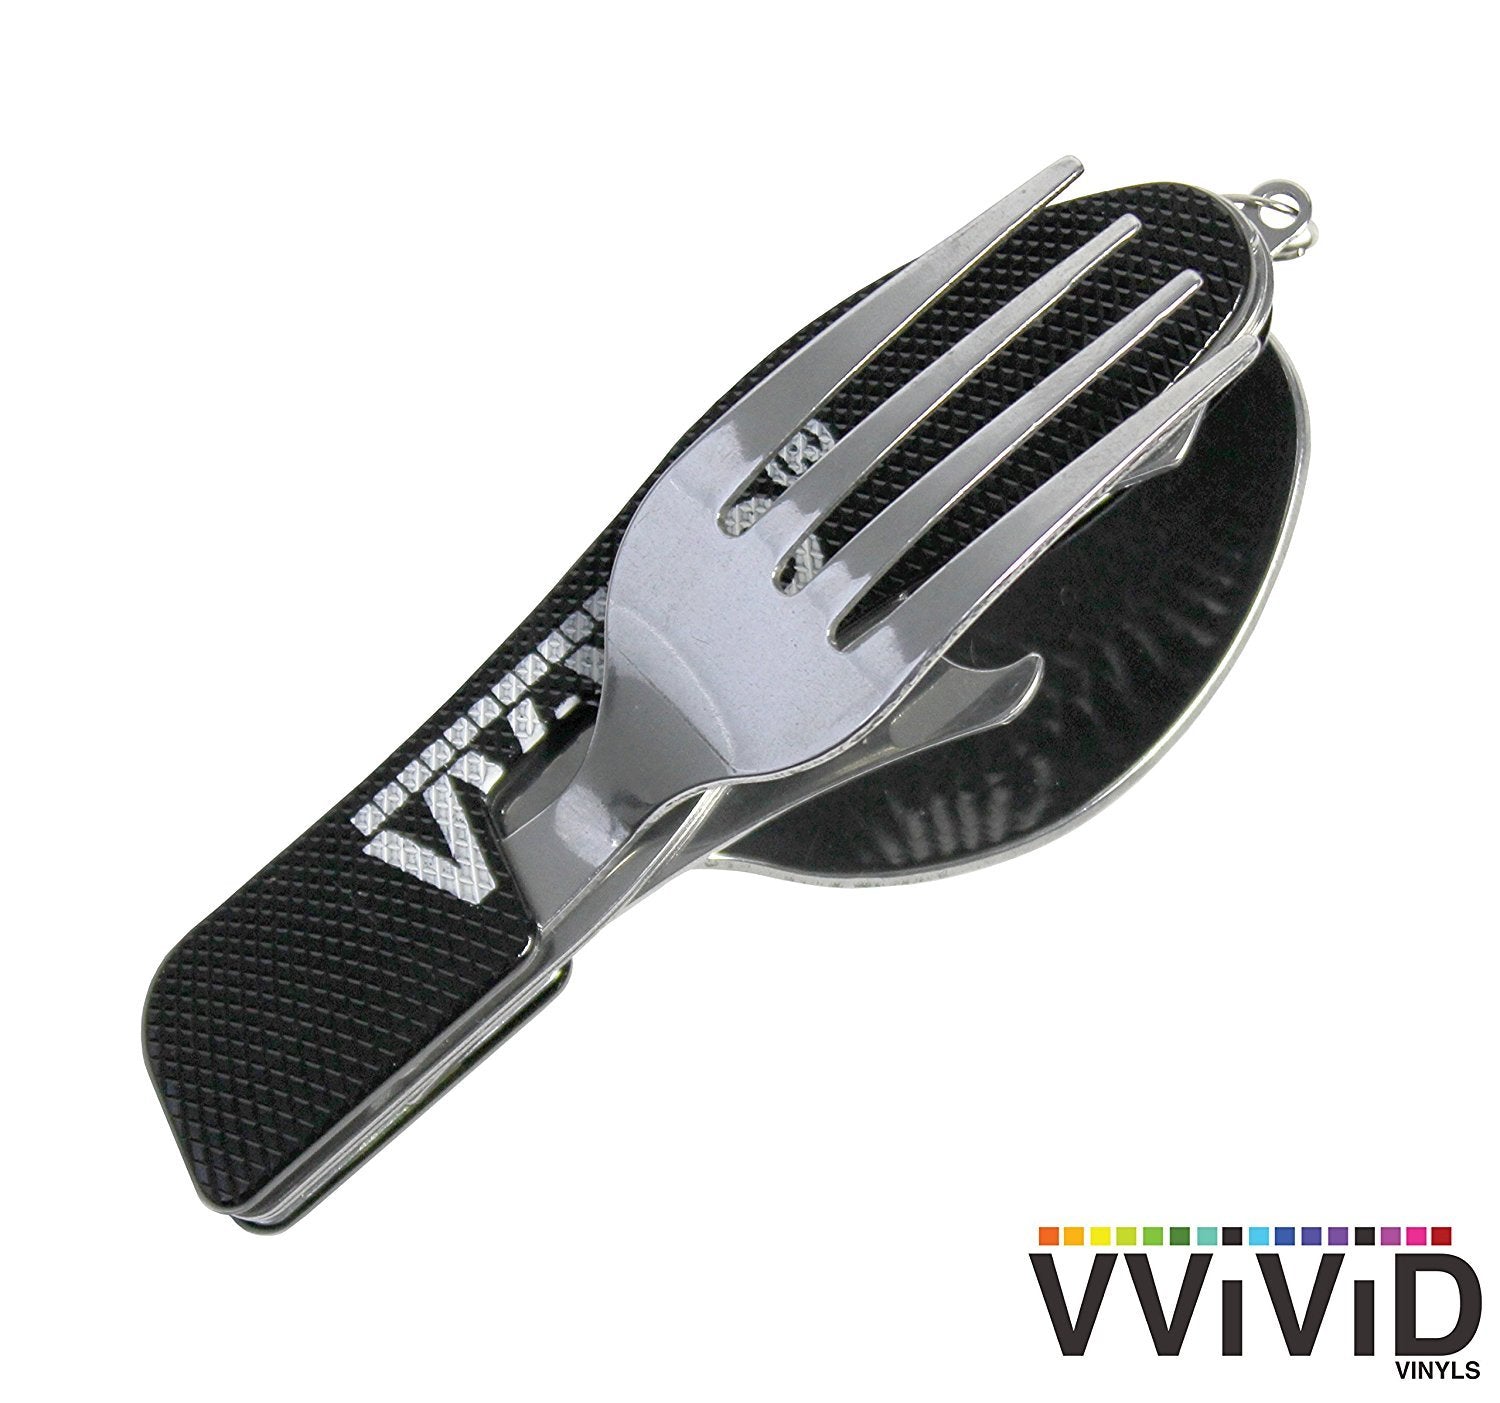 VViViD Stainless Steel Camping Flatware Folding Compact Utensil Multi-Tool